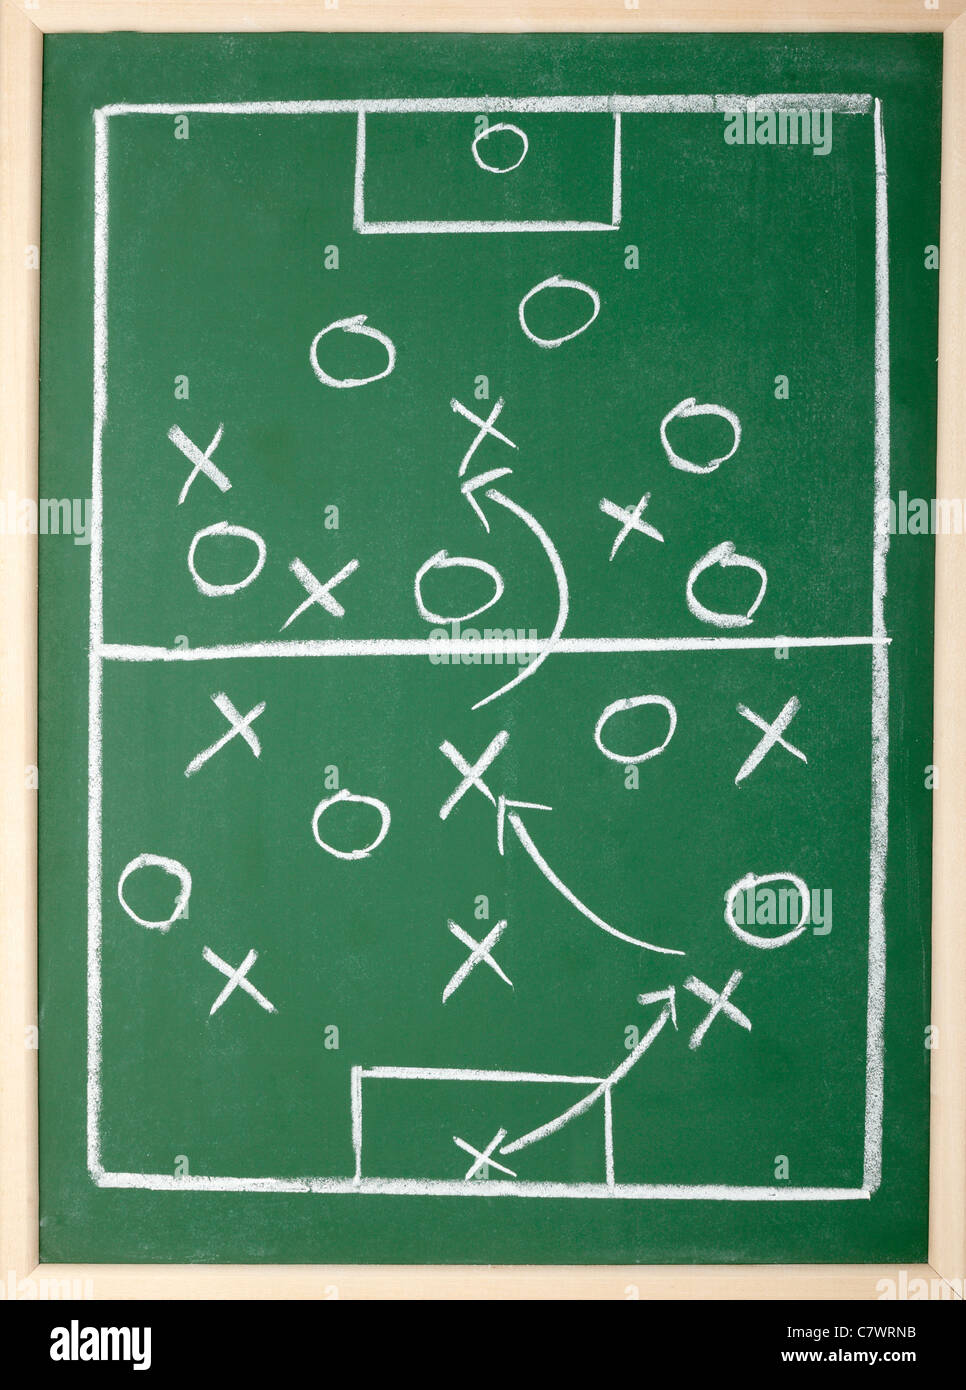 26 To desk ideas  football pitch, football tactics, black and